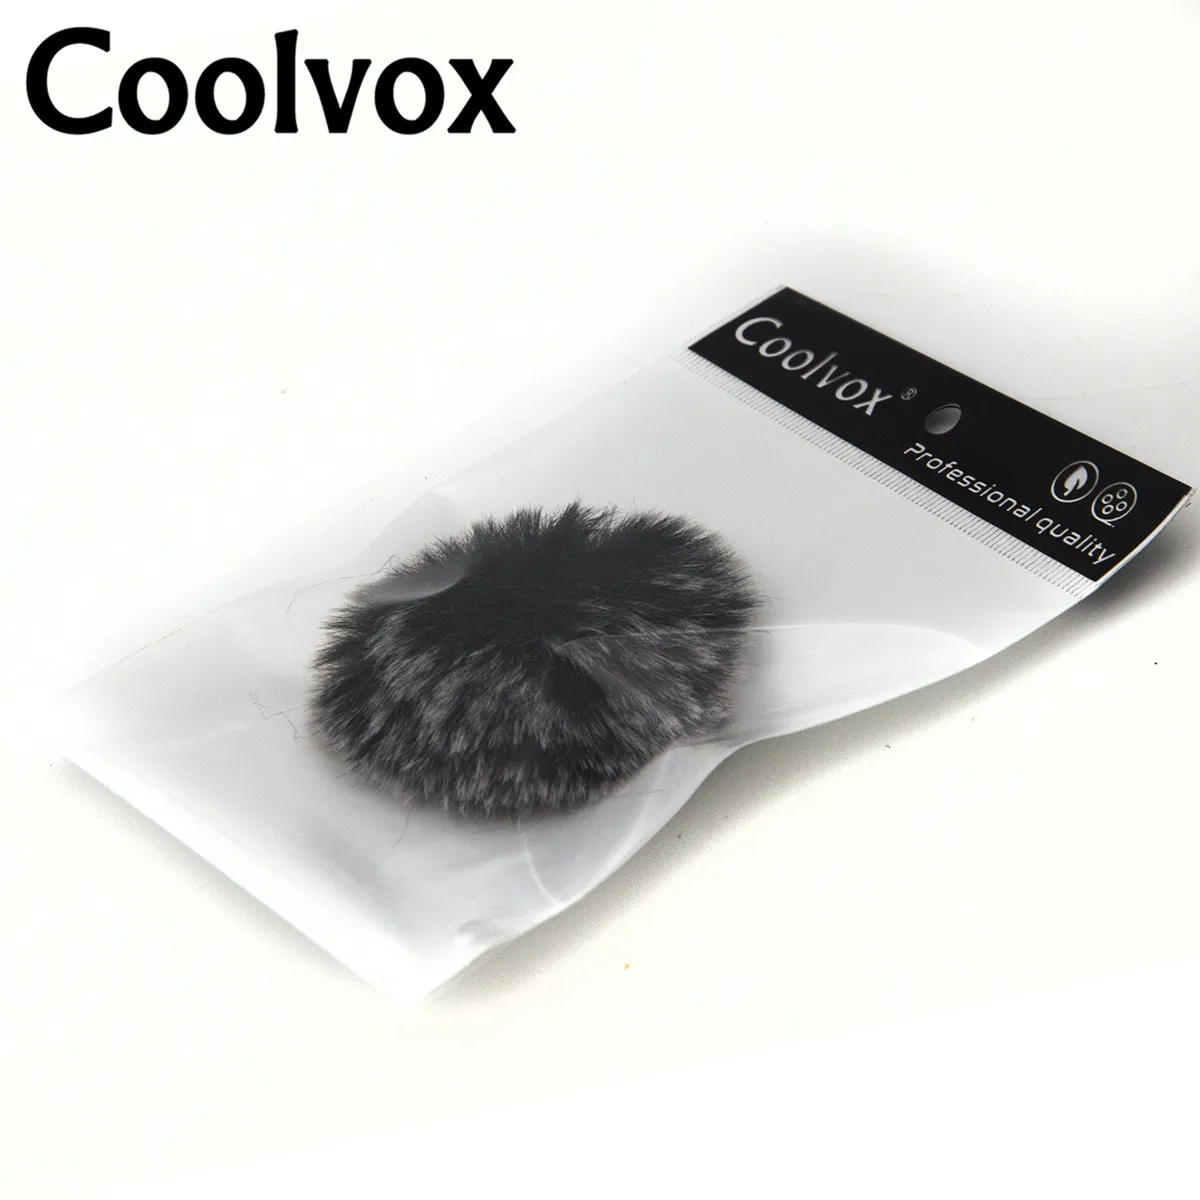 Coolvox Lapel Mic Furry Windscreen Fur Windshield Wind Muff Soft Comfortable For SONY RODE BOYA Lapel Lavalier Microphones images - 6